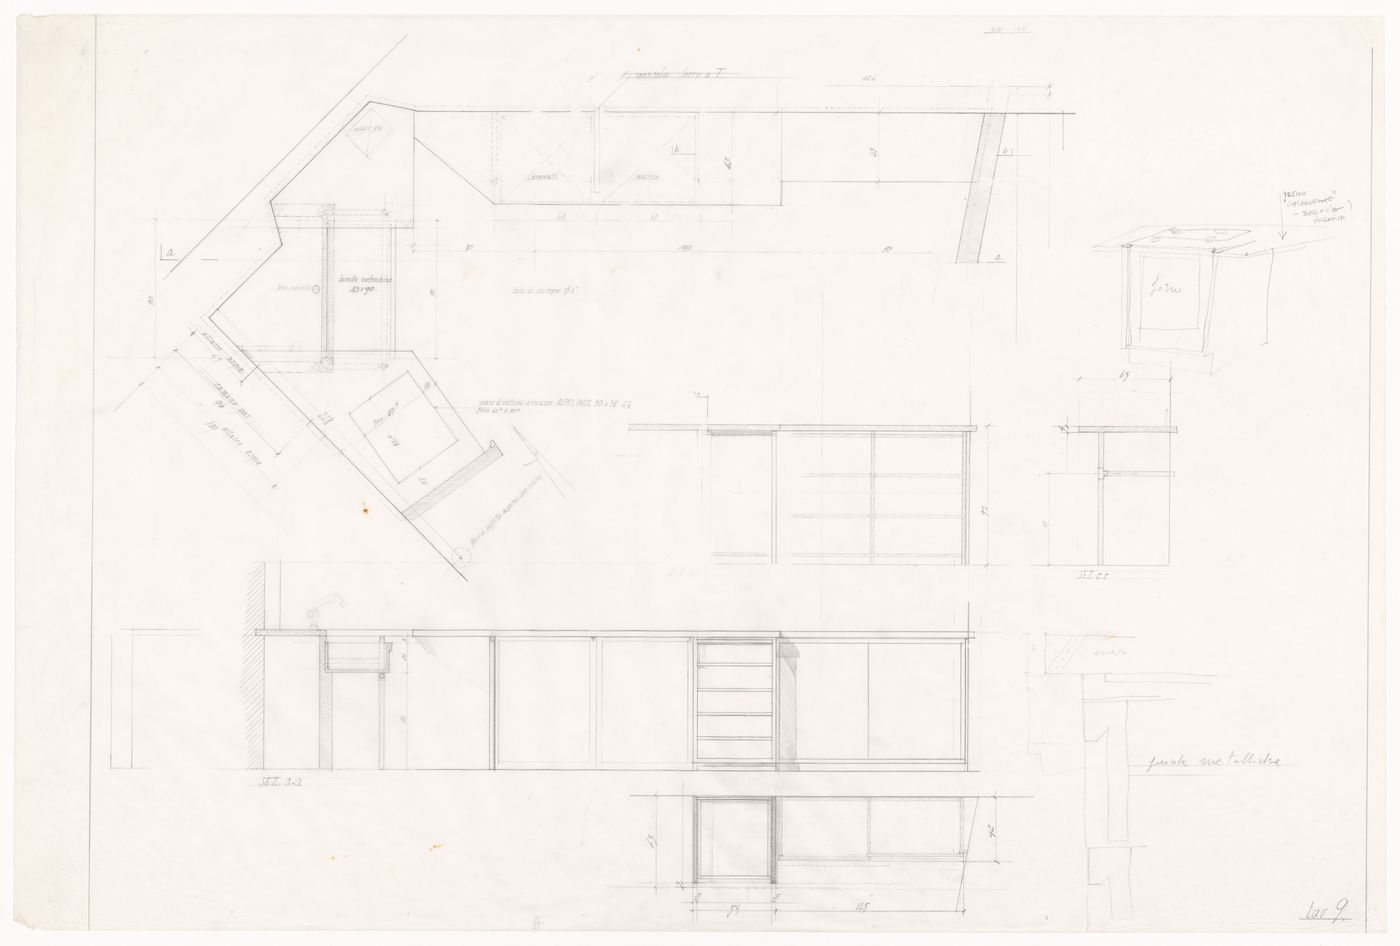 Sections, plans and sketches for Casa De Paolini, Milan, Italy